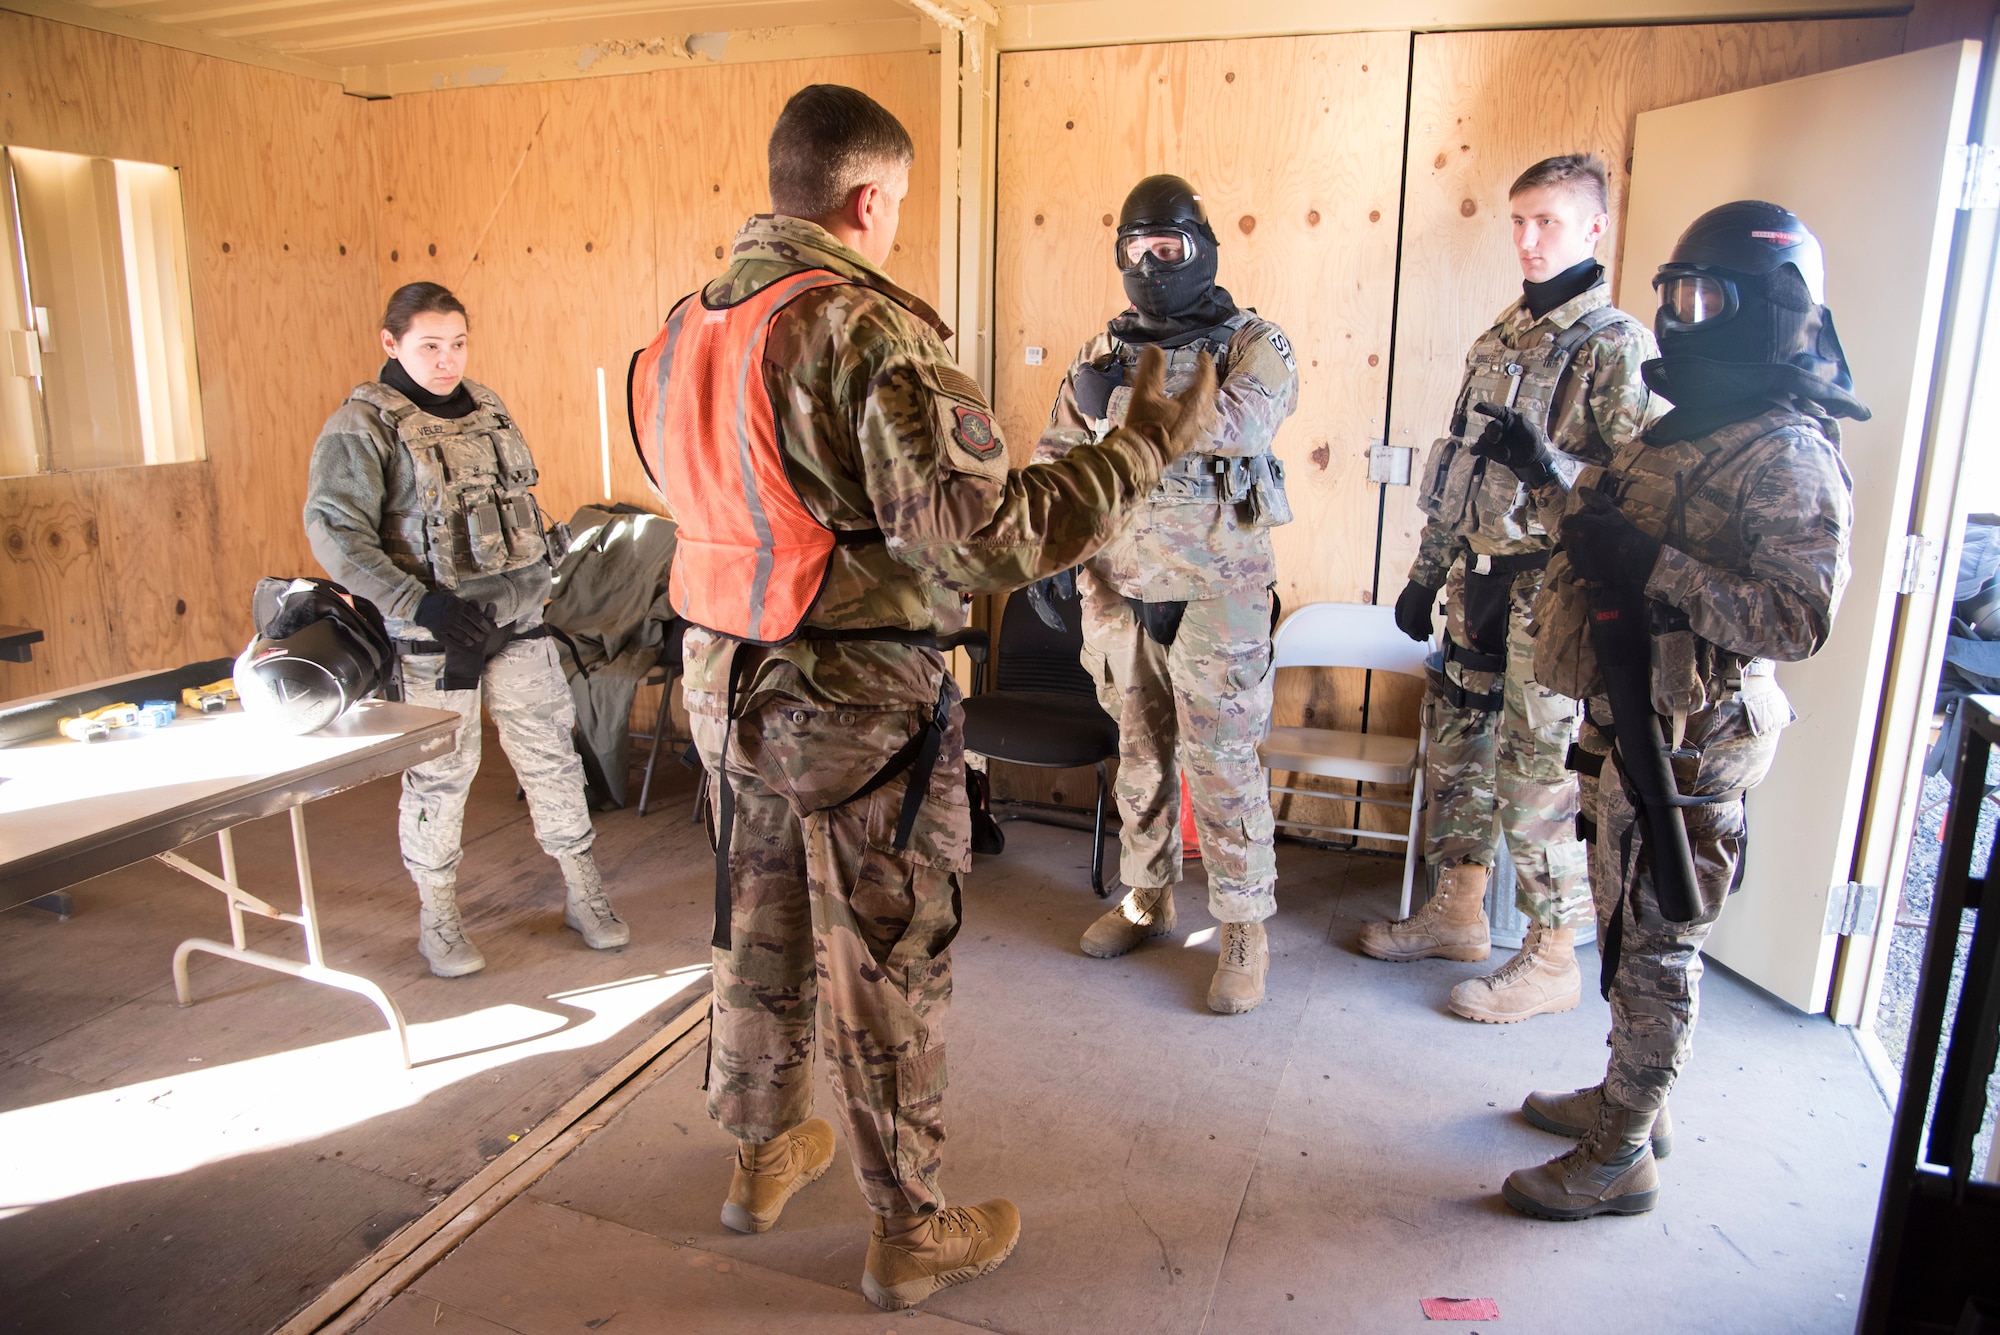 Airmen from the 92nd Security Forces Squadron are briefed on scenarios they may face during a high-risk situation training exercise at Fairchild Air Force Base, Washington, Oct. 15, 2018. SFS instructors provided immediate feedback to trainees on what went well and new approaches they may take to achieve a better outcome after each completed scenario. (U.S. Air Force photo/ Senior Airman Ryan Lackey)